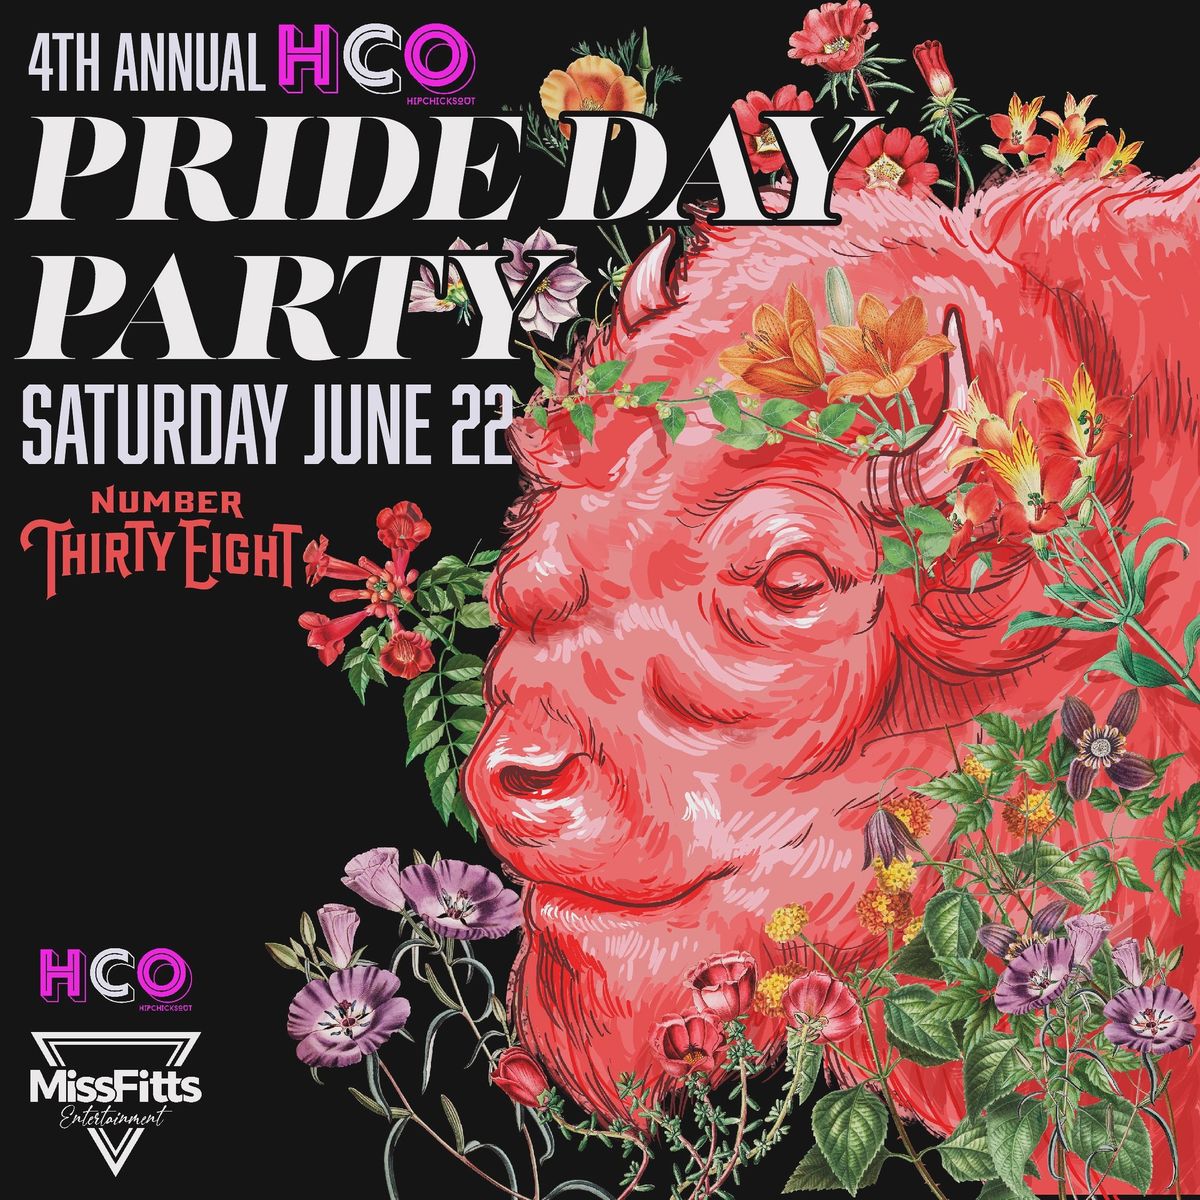 4th ANNUAL HCO PRIDE DAY PARTY